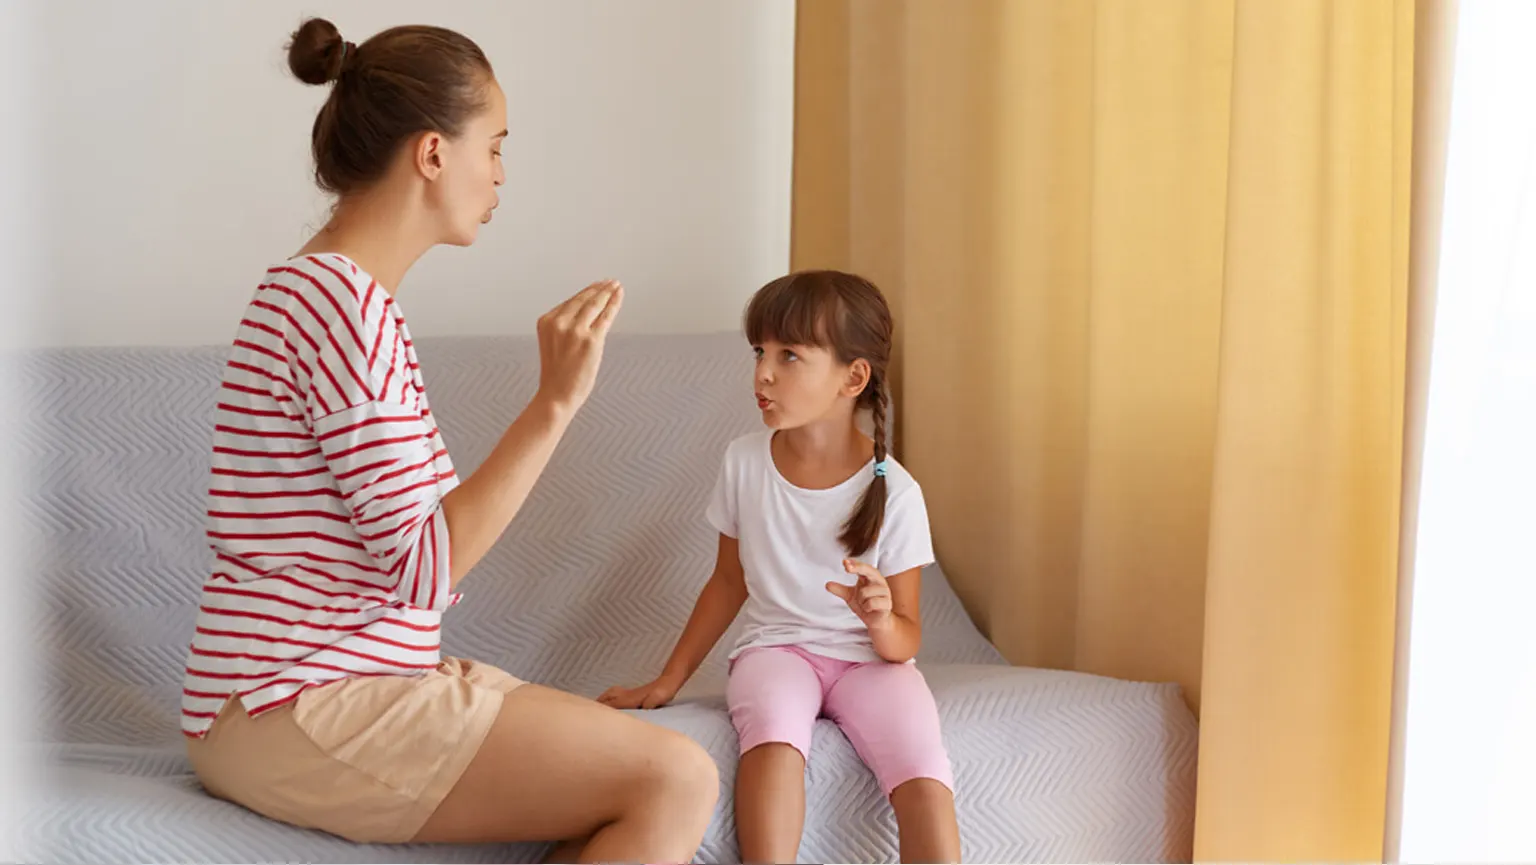 Five things to avoid while speaking with the child